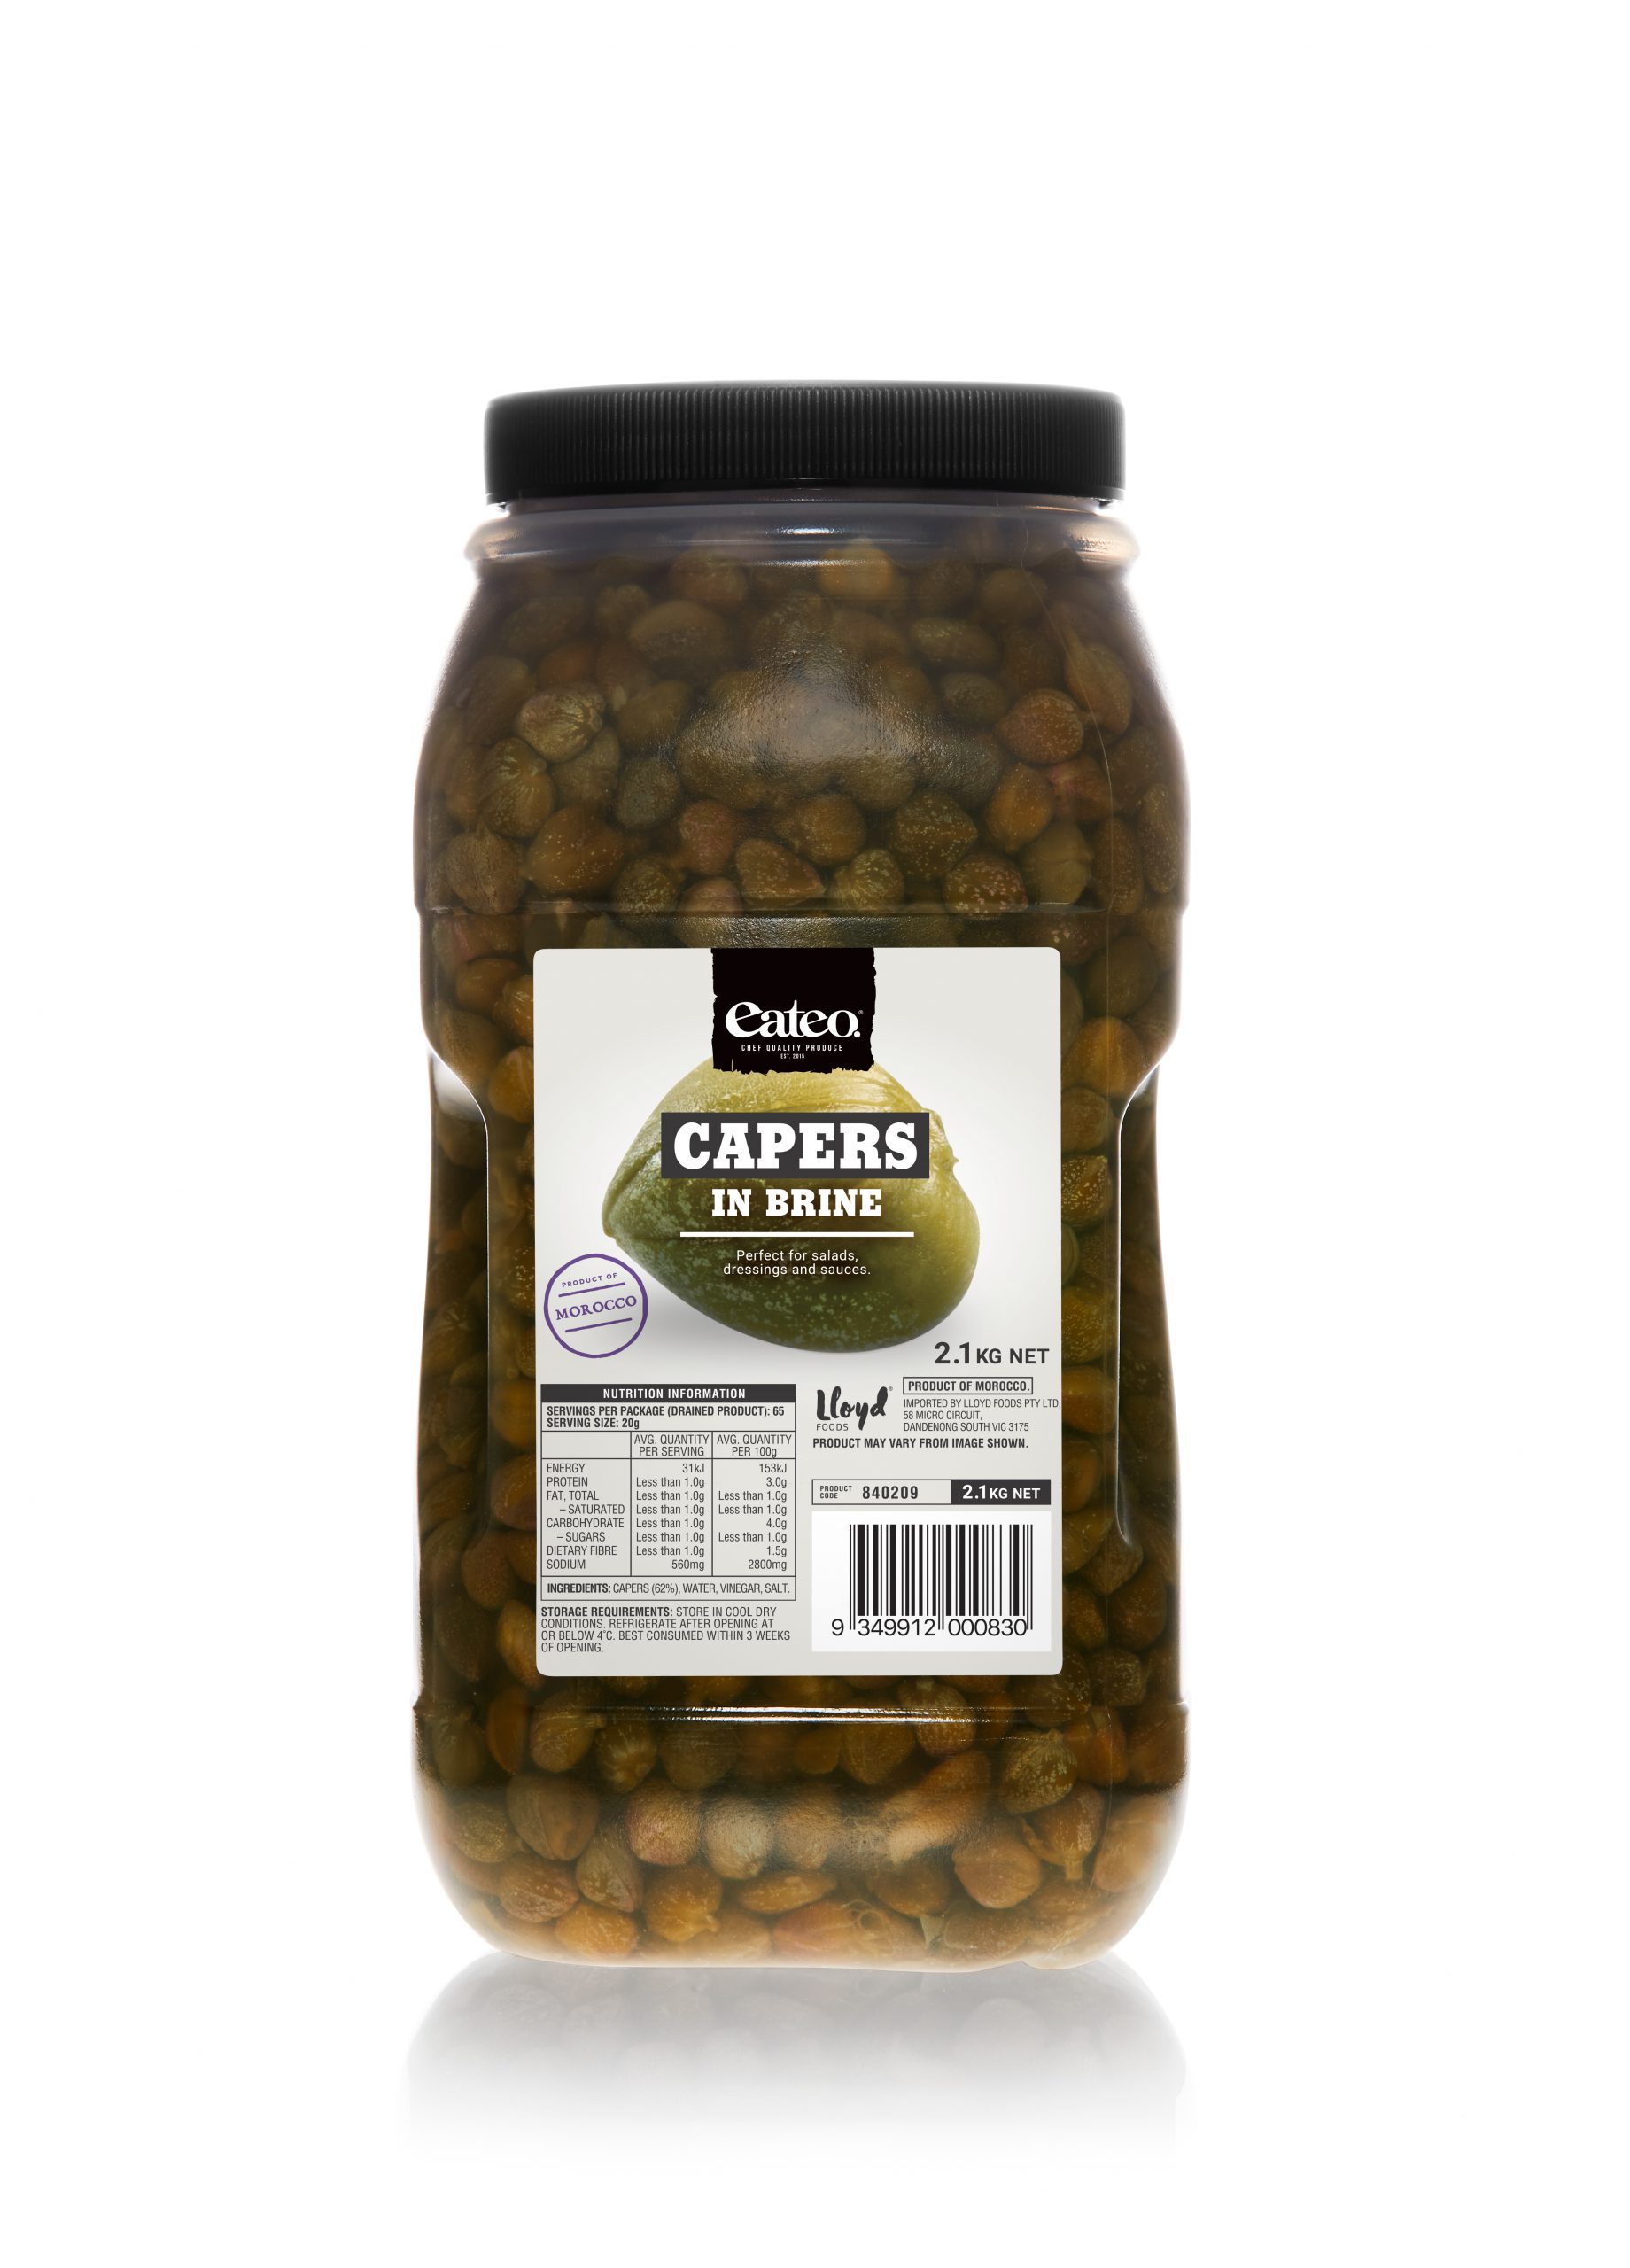 Capers In Brine